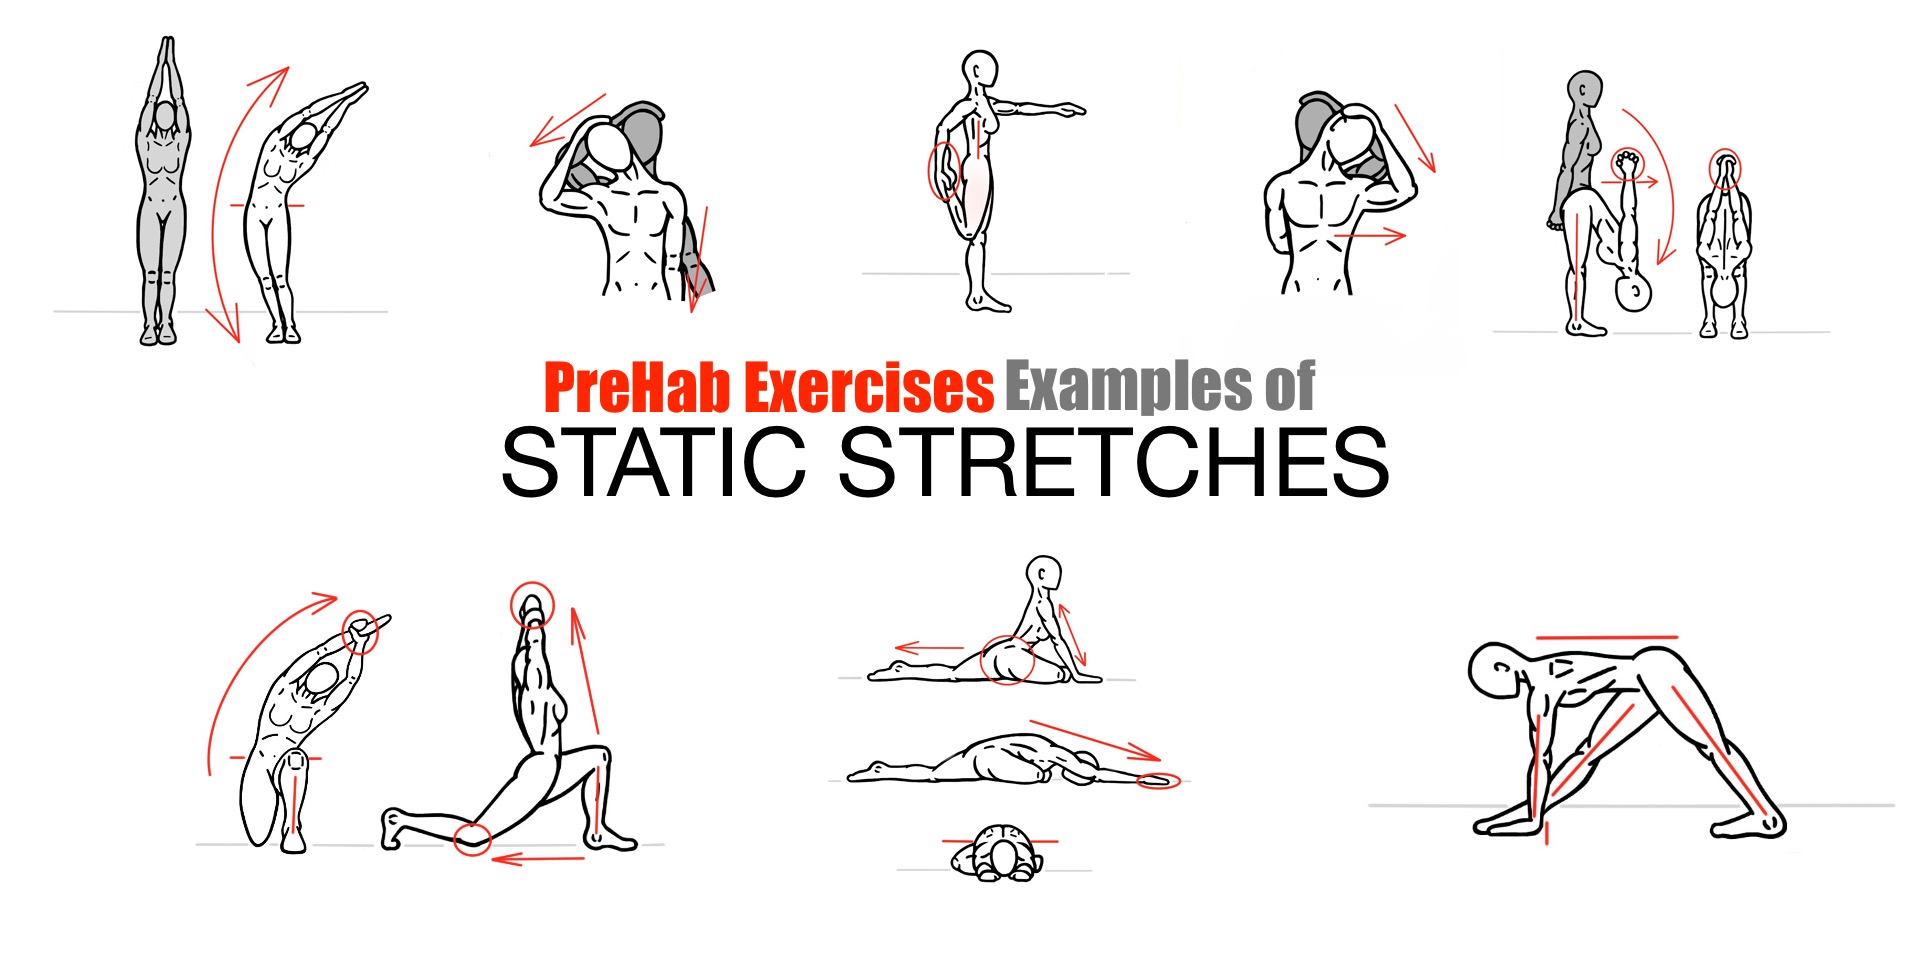 Examples of Static Stretches